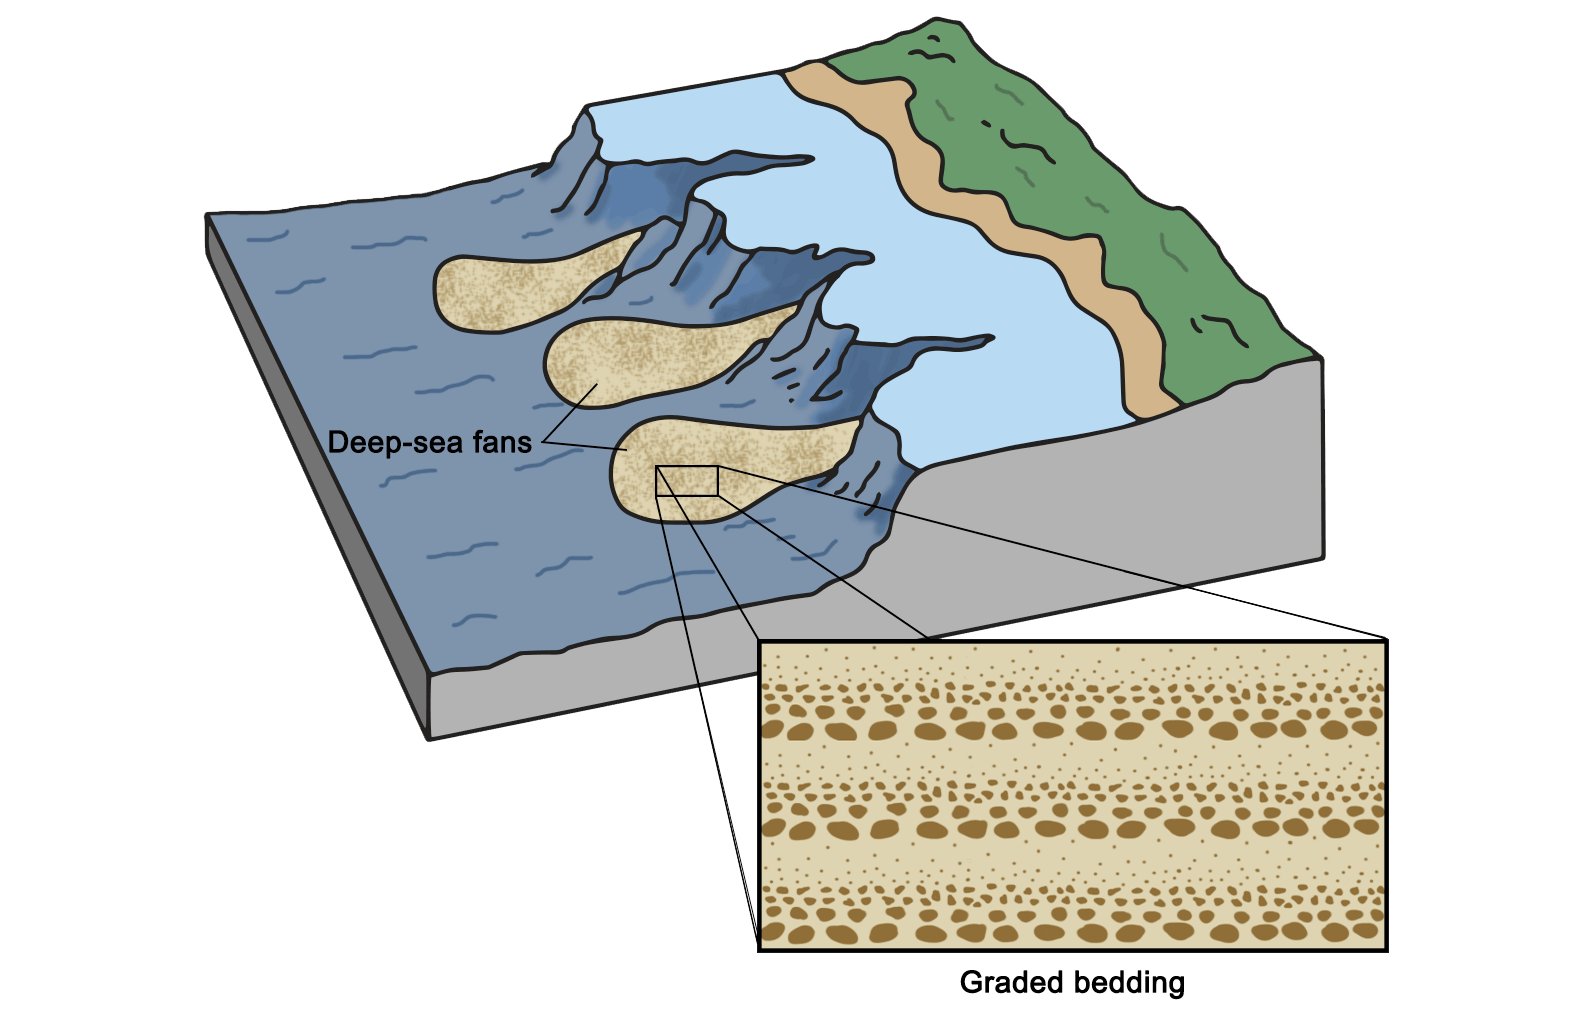 Diagram showing how turbidity currents form graded sediment deposits over time.